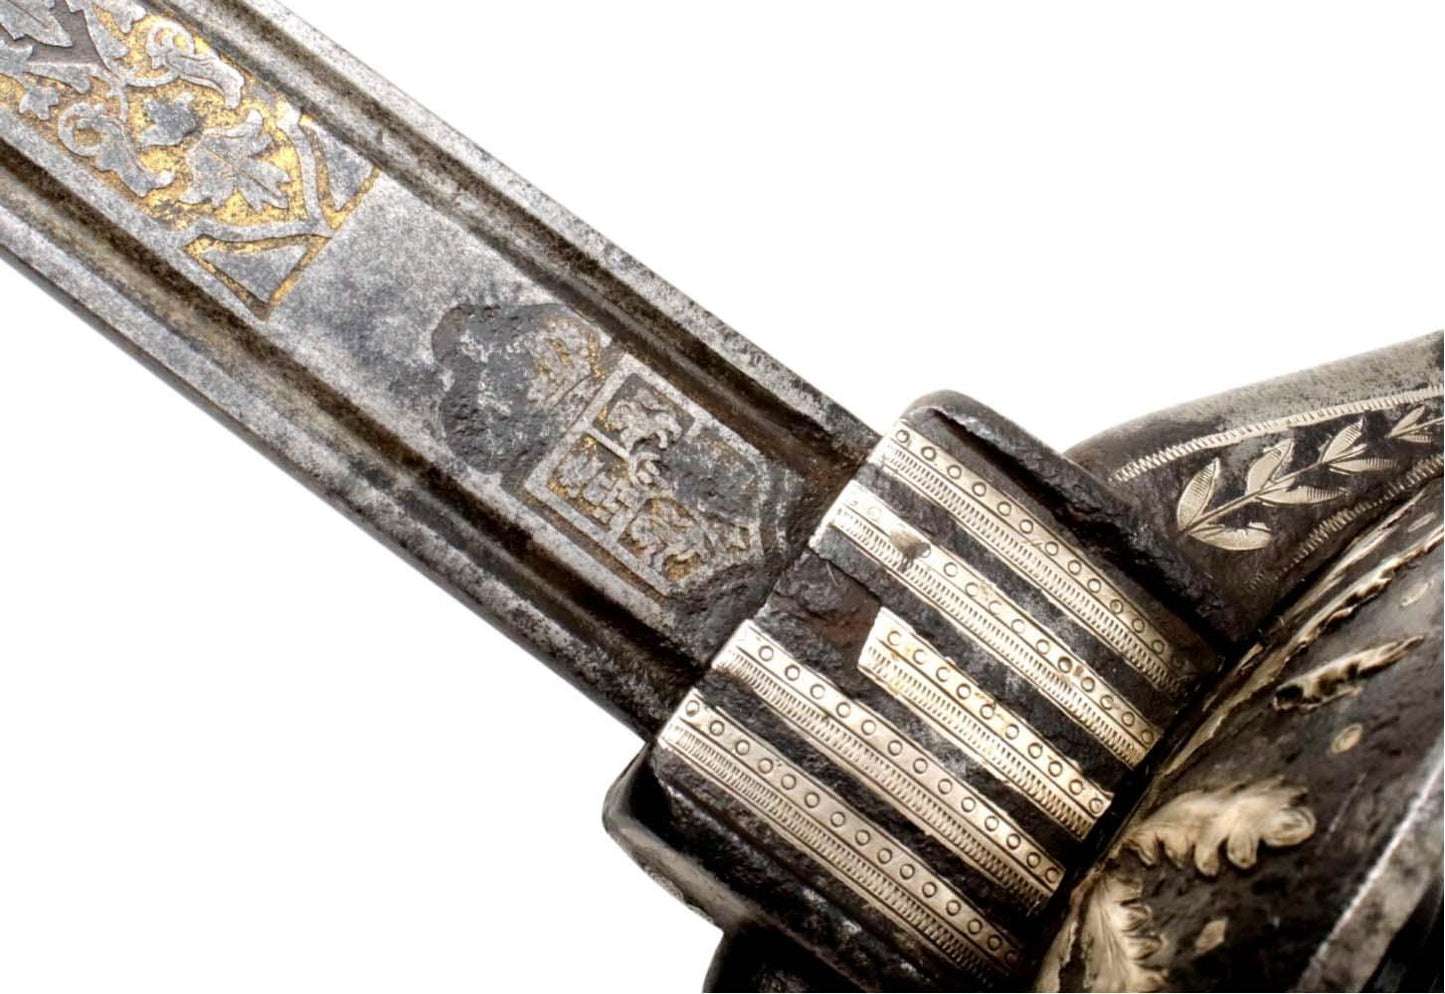 Spanish or Mexican 1880 Senior Officer's Sword with Ancestral 18th C. heavily silvered and gold overlaid Iron Hilt and Toledo Blade